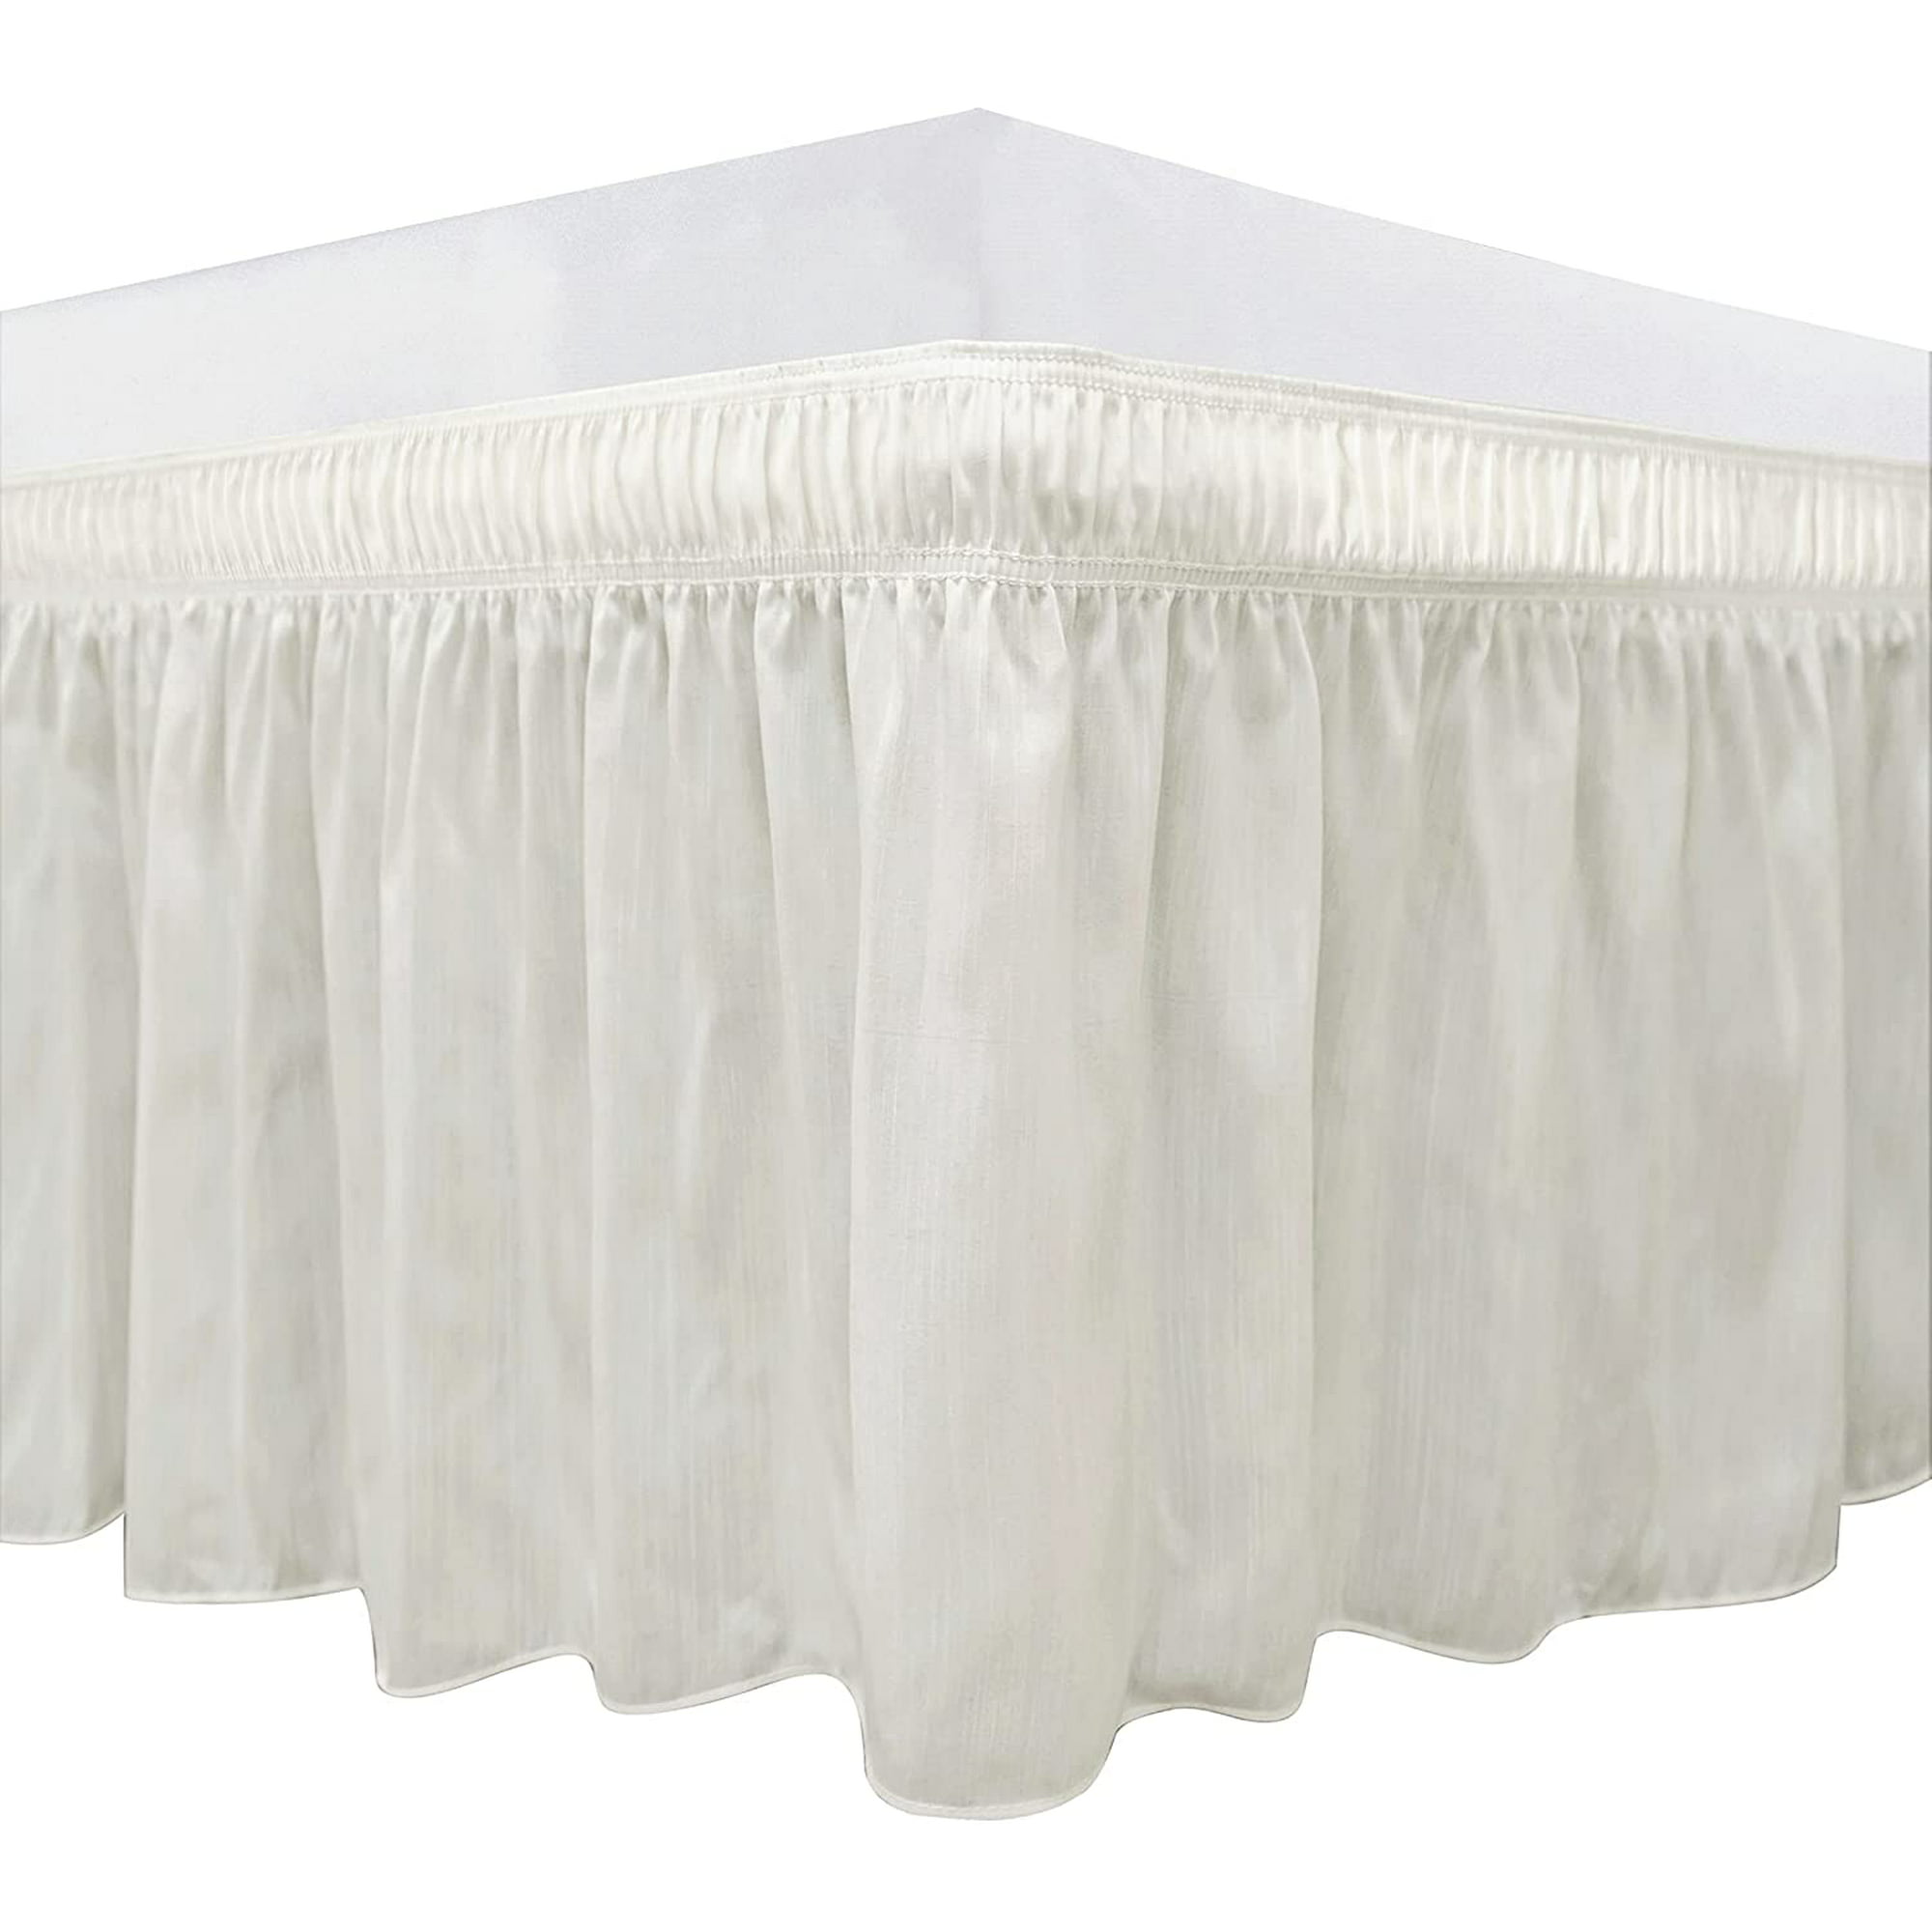 Bed Skirts With Adjustable Belts, Twin Xl Bed Skirt 15 Inch Drop